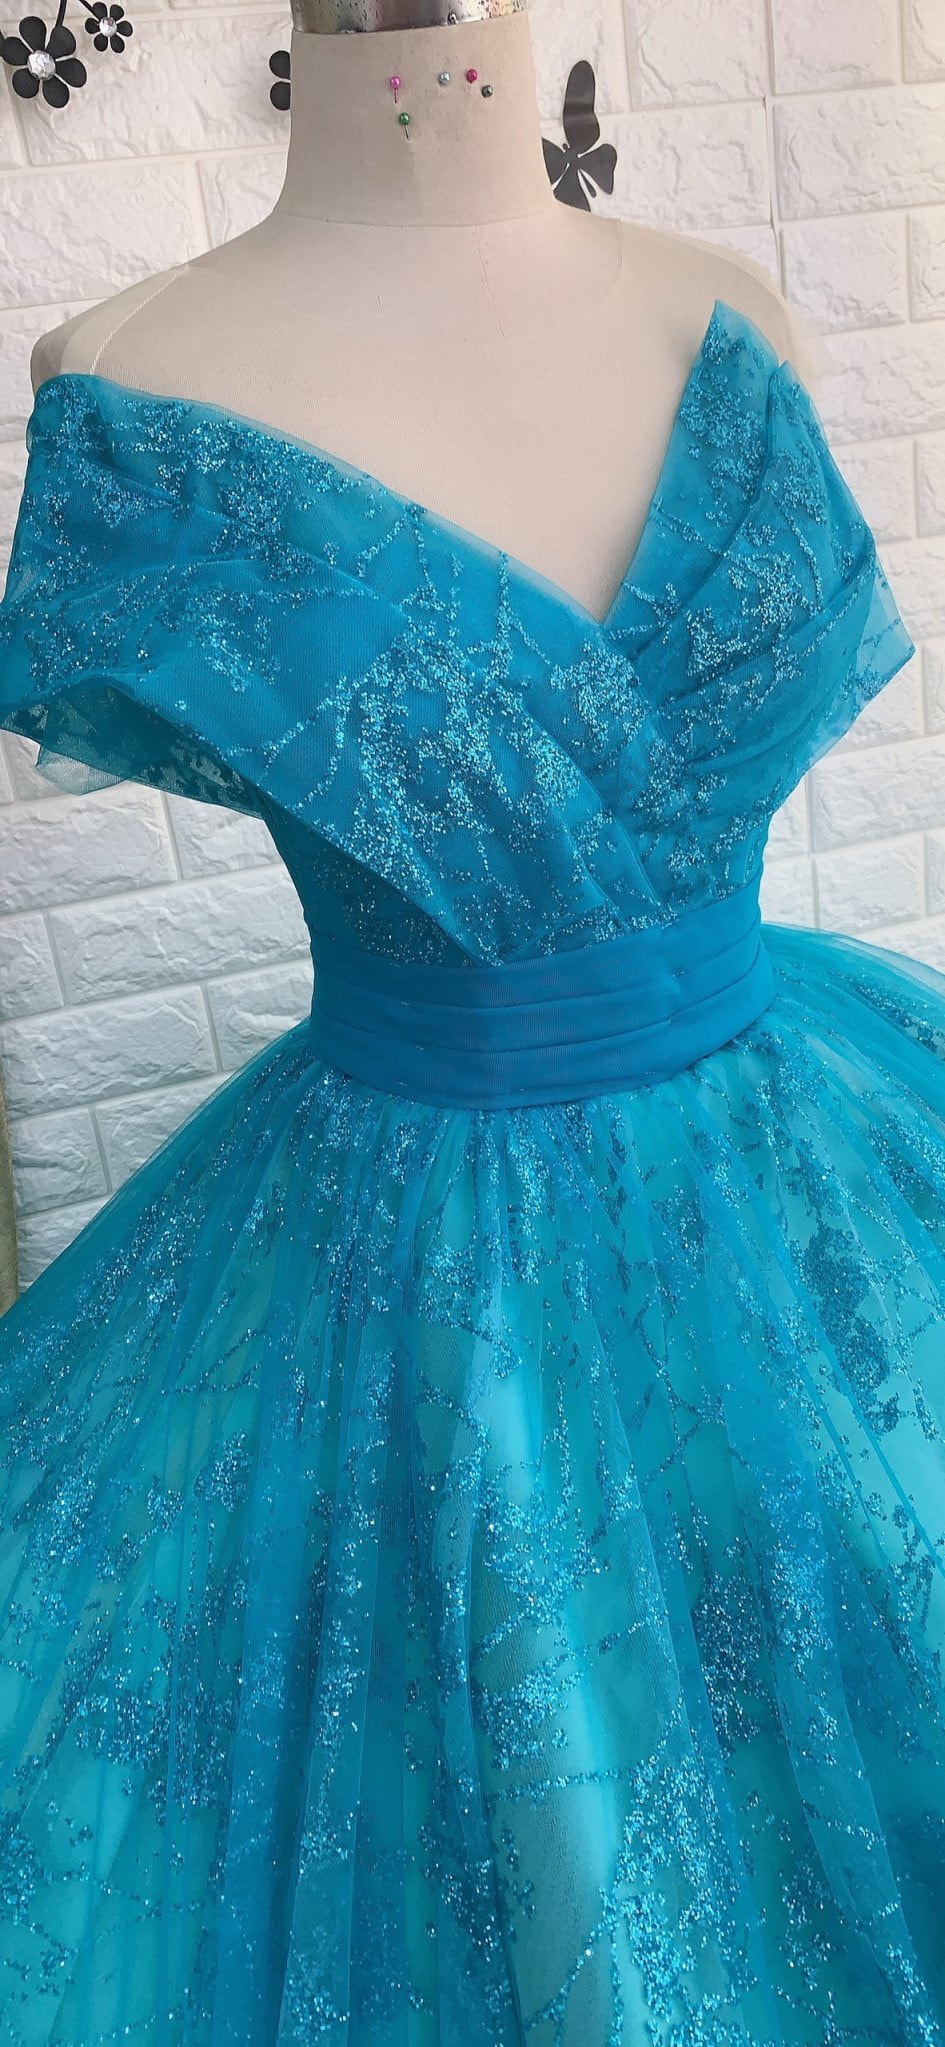 Aqua blue/turquoise sparkle princess ball gown wedding dress with ...